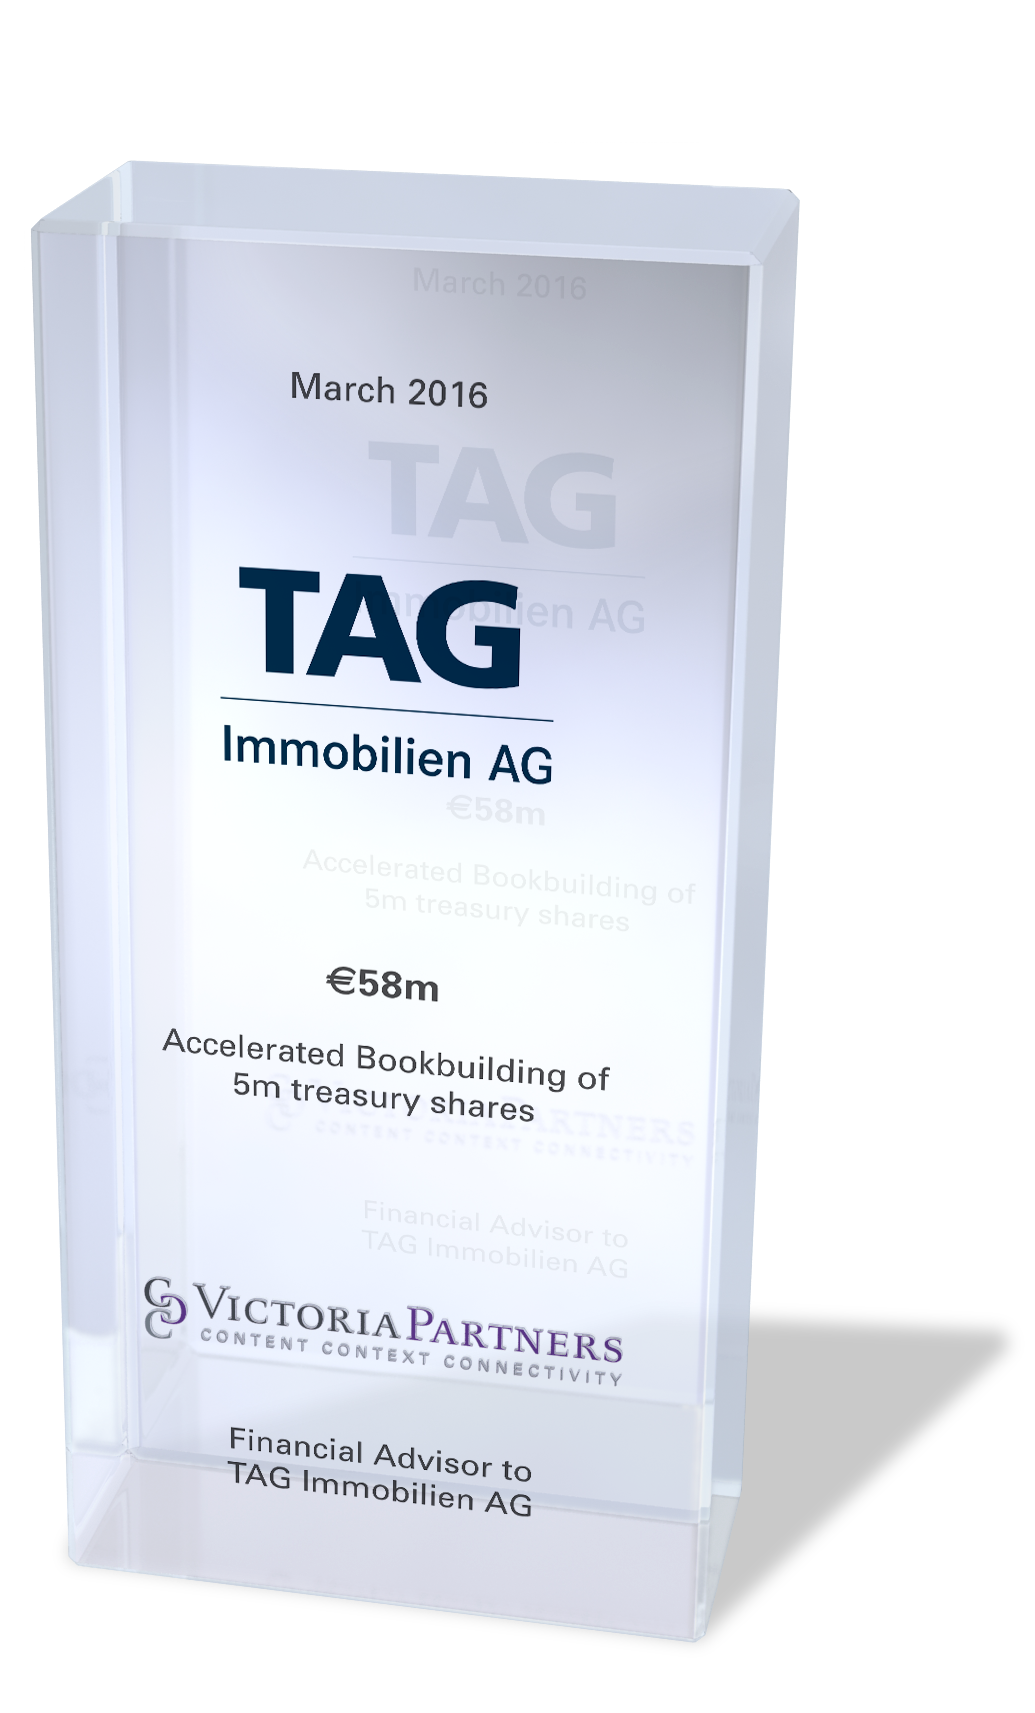 VICTORIAPARTNERS - Financial Advisor to TAG Immobilien AG - March 2016